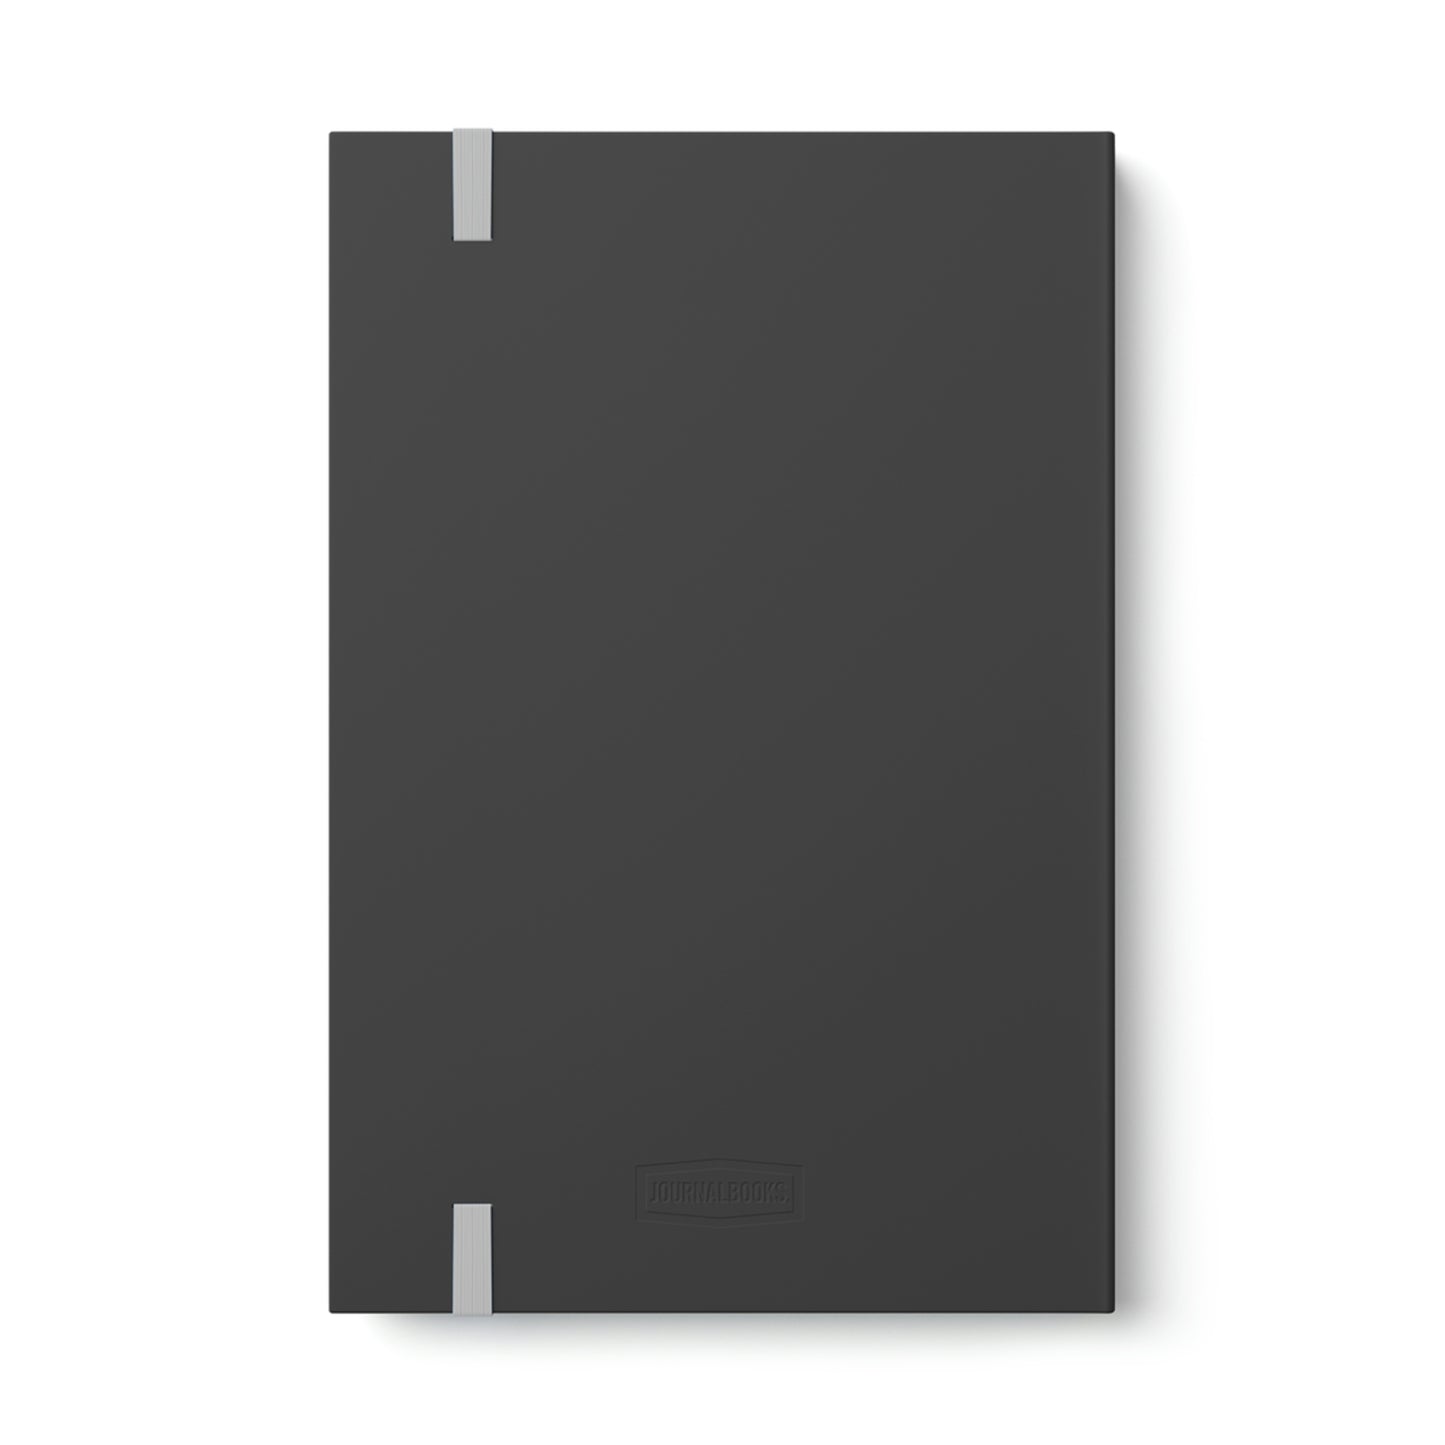 Hiking Is Life Black Contrast Notebook - Ruled